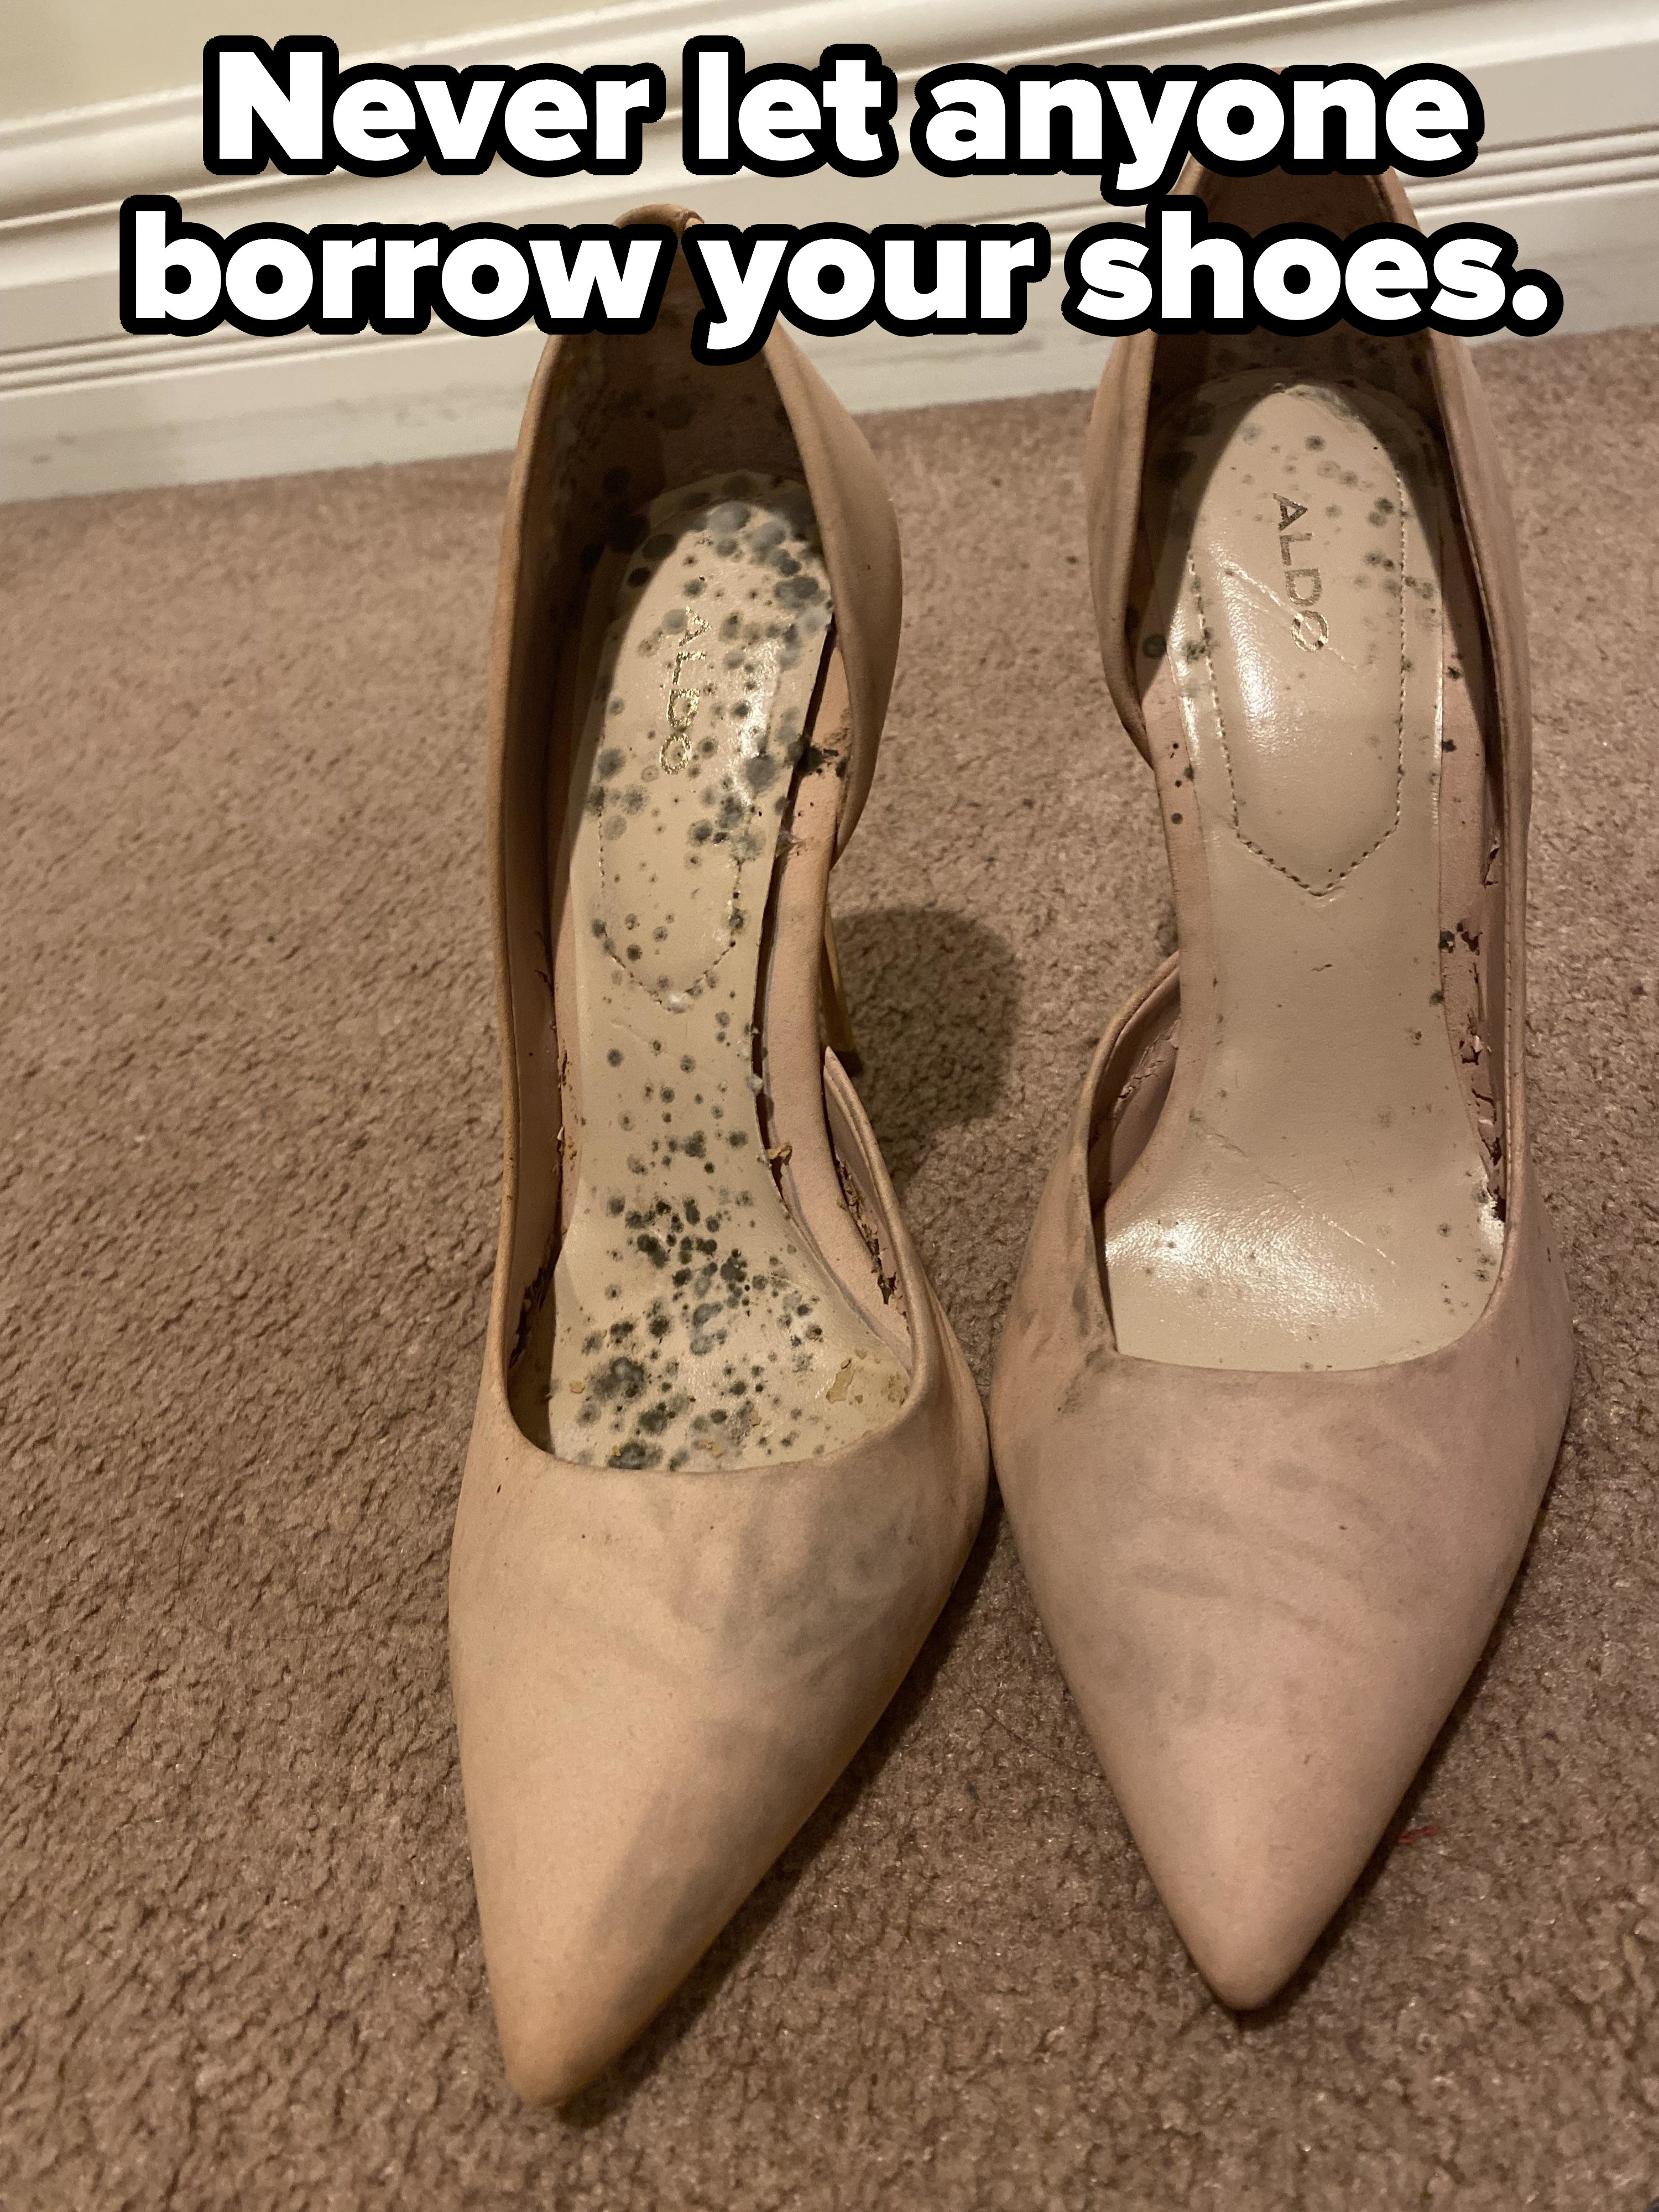 Mold/dirt stains inside a pair of high heels